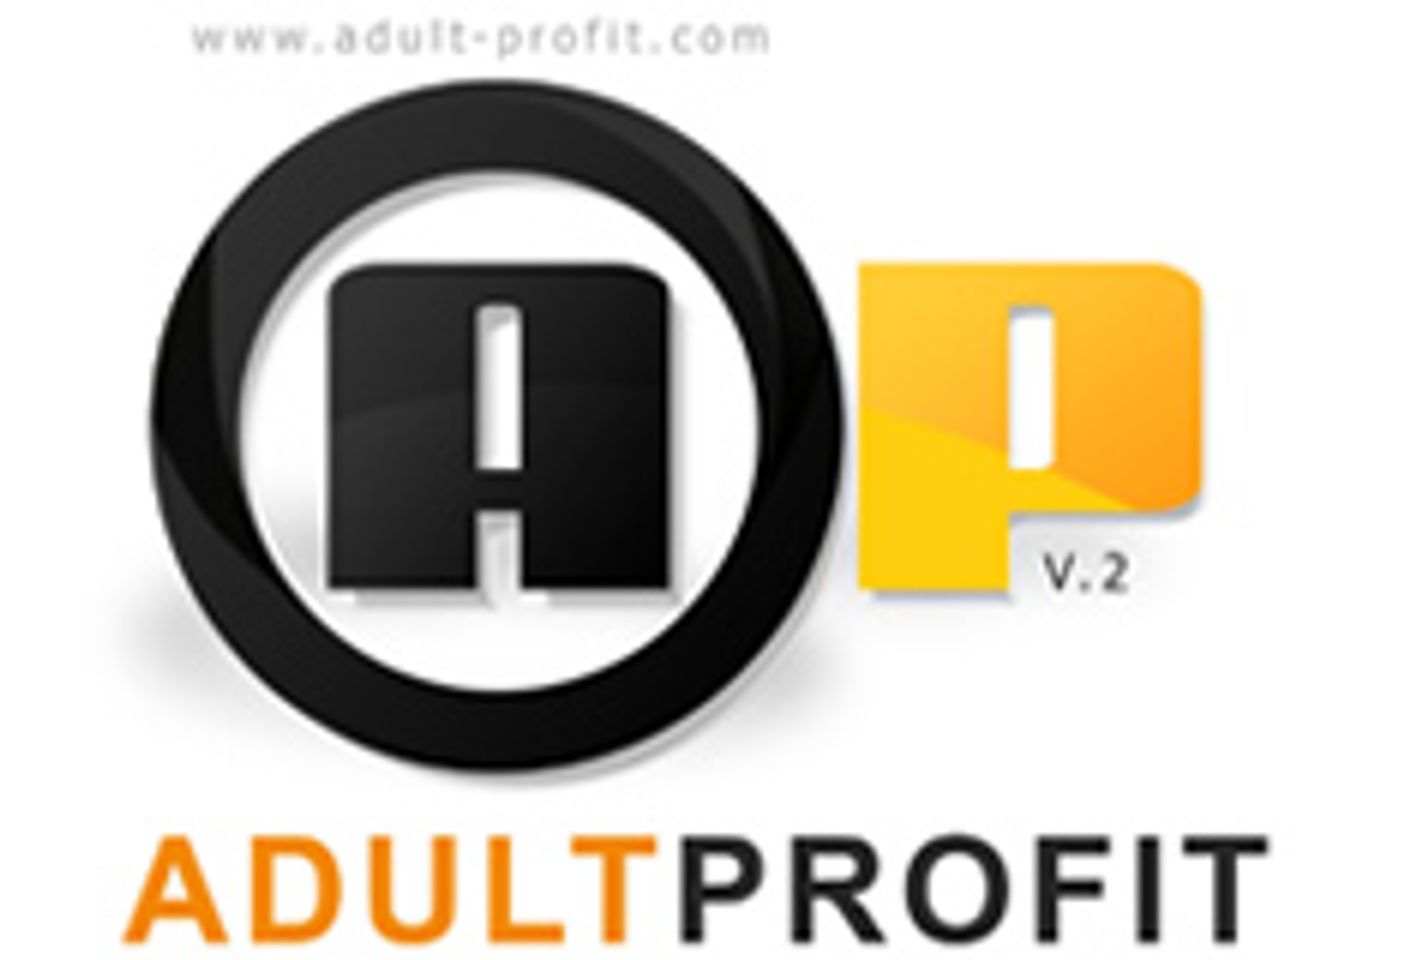 Adult Profit Responds to Tube Site Mania With New Promo Vids